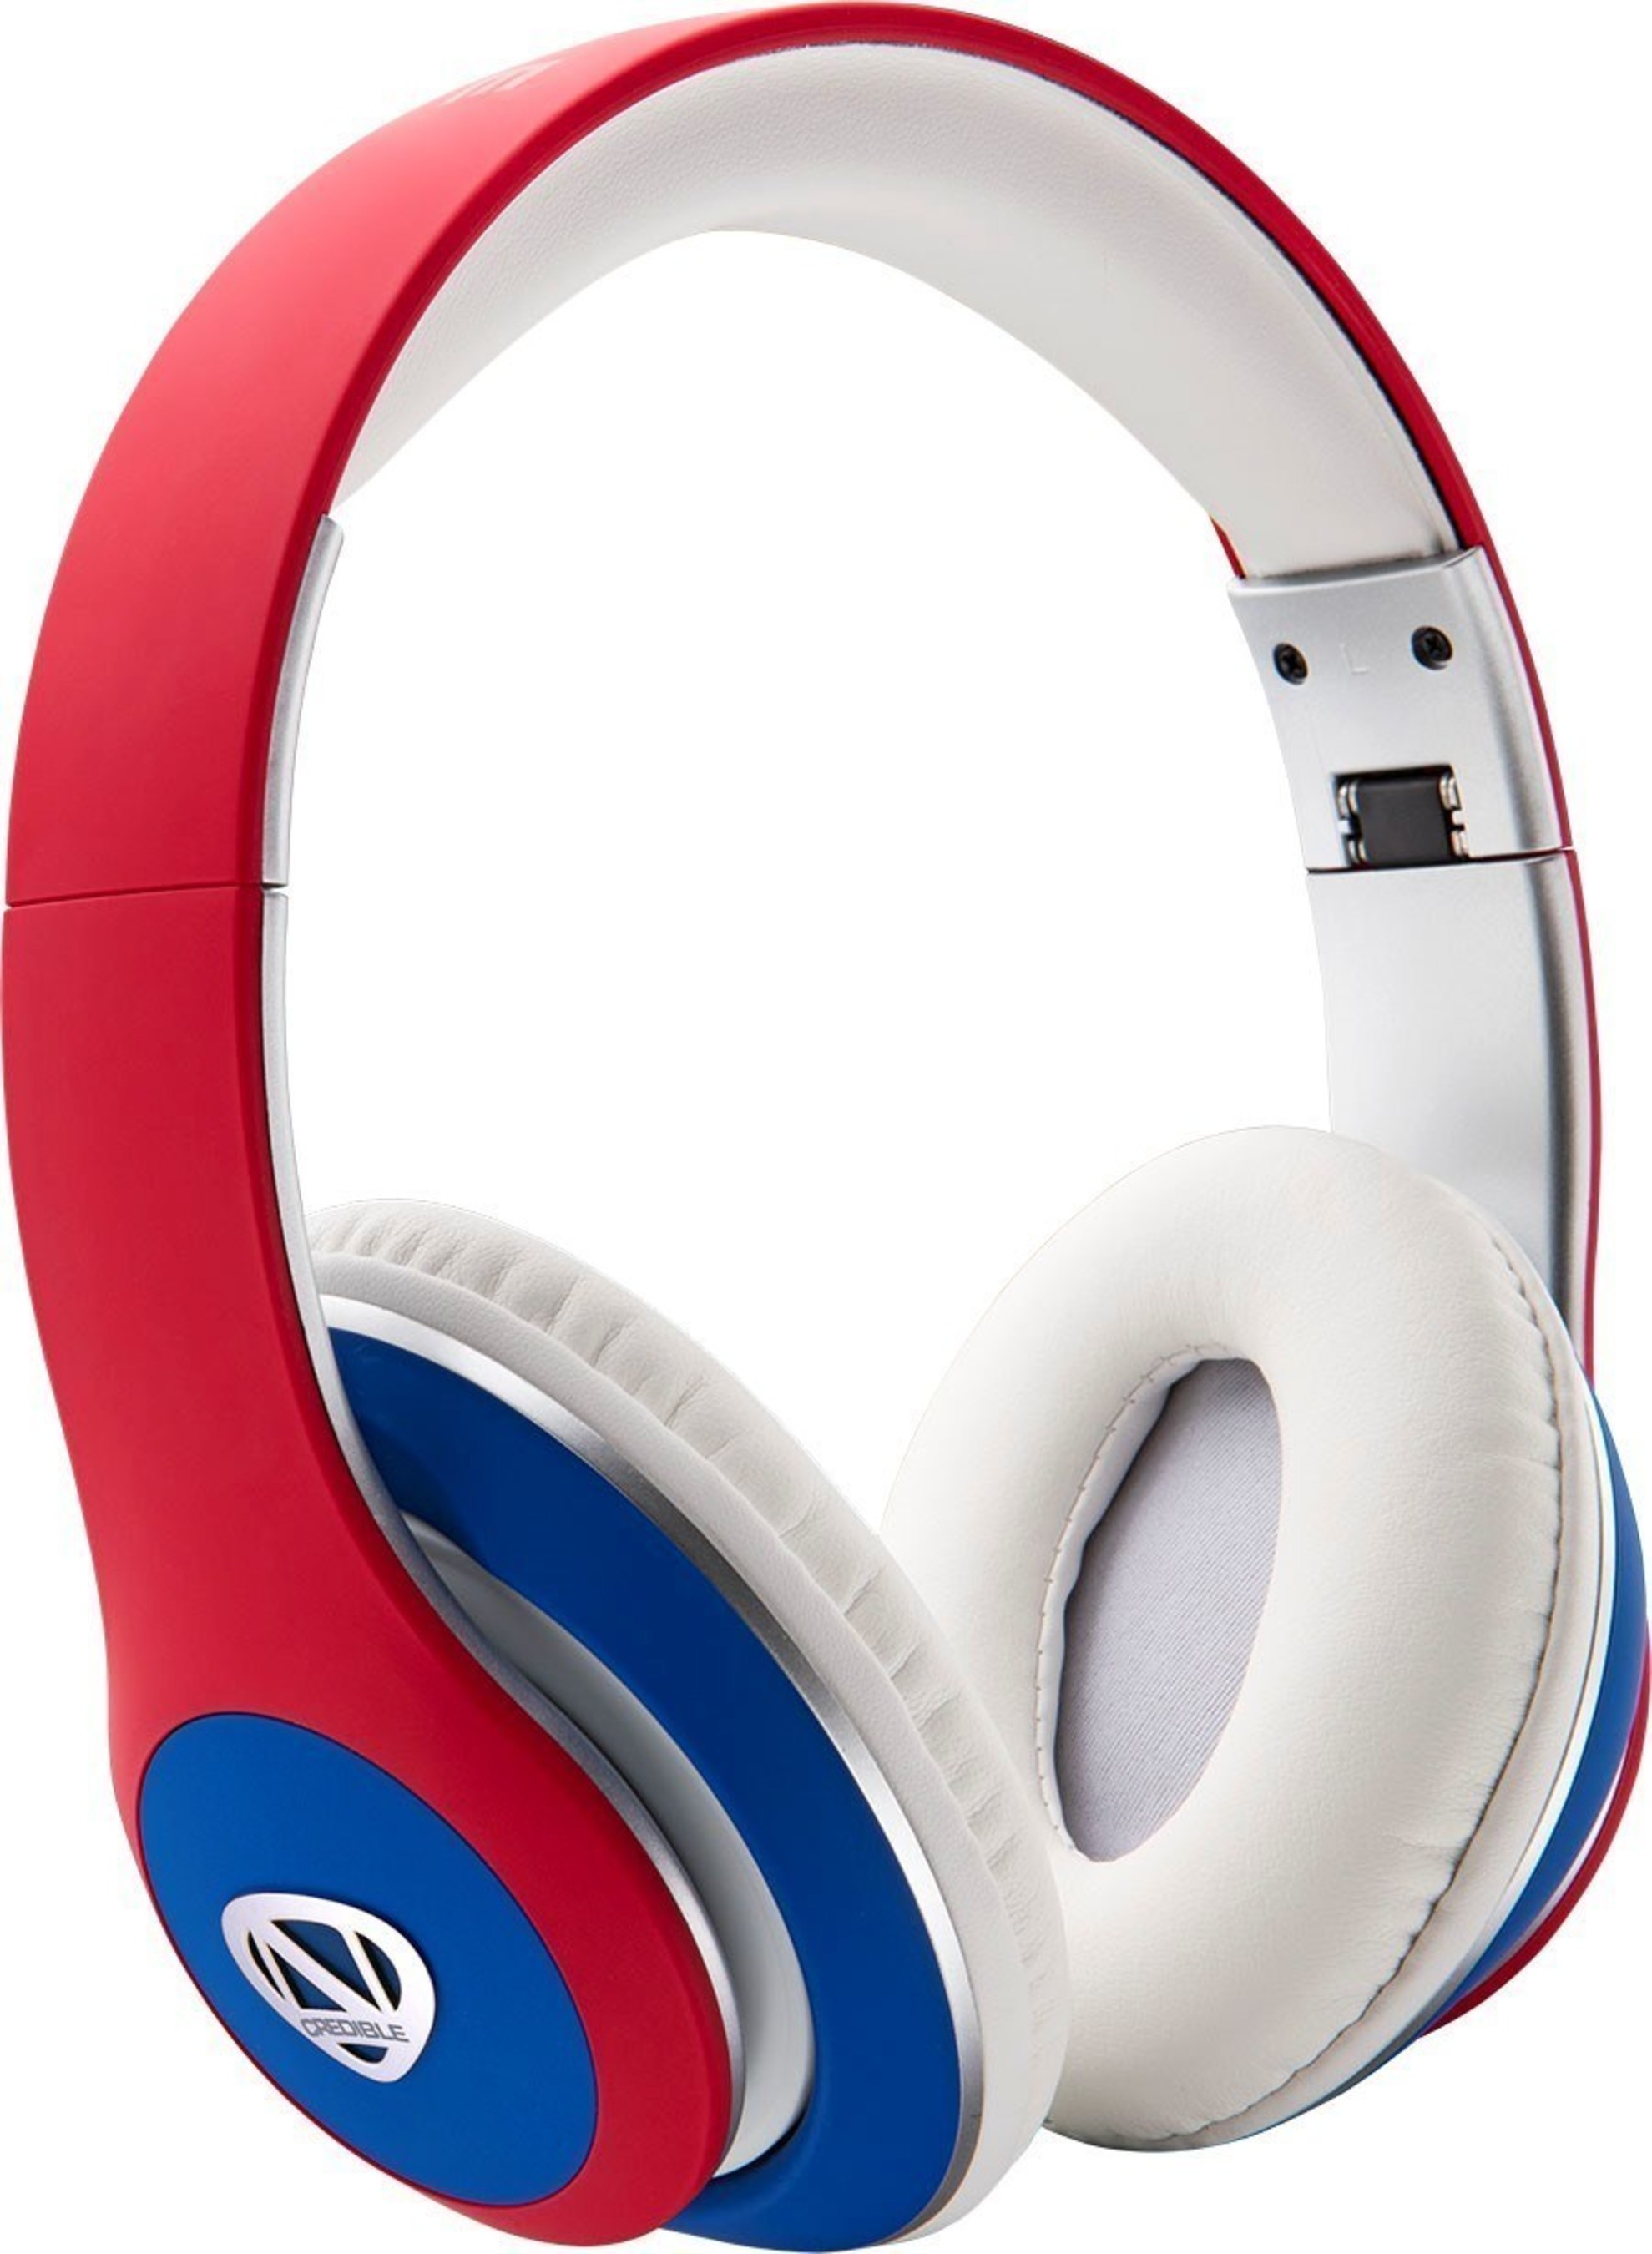 RadioShack And Nick Cannon Launch Limited Edition Red, White & Blue NCREDIBLE 1 ...1979 x 2700